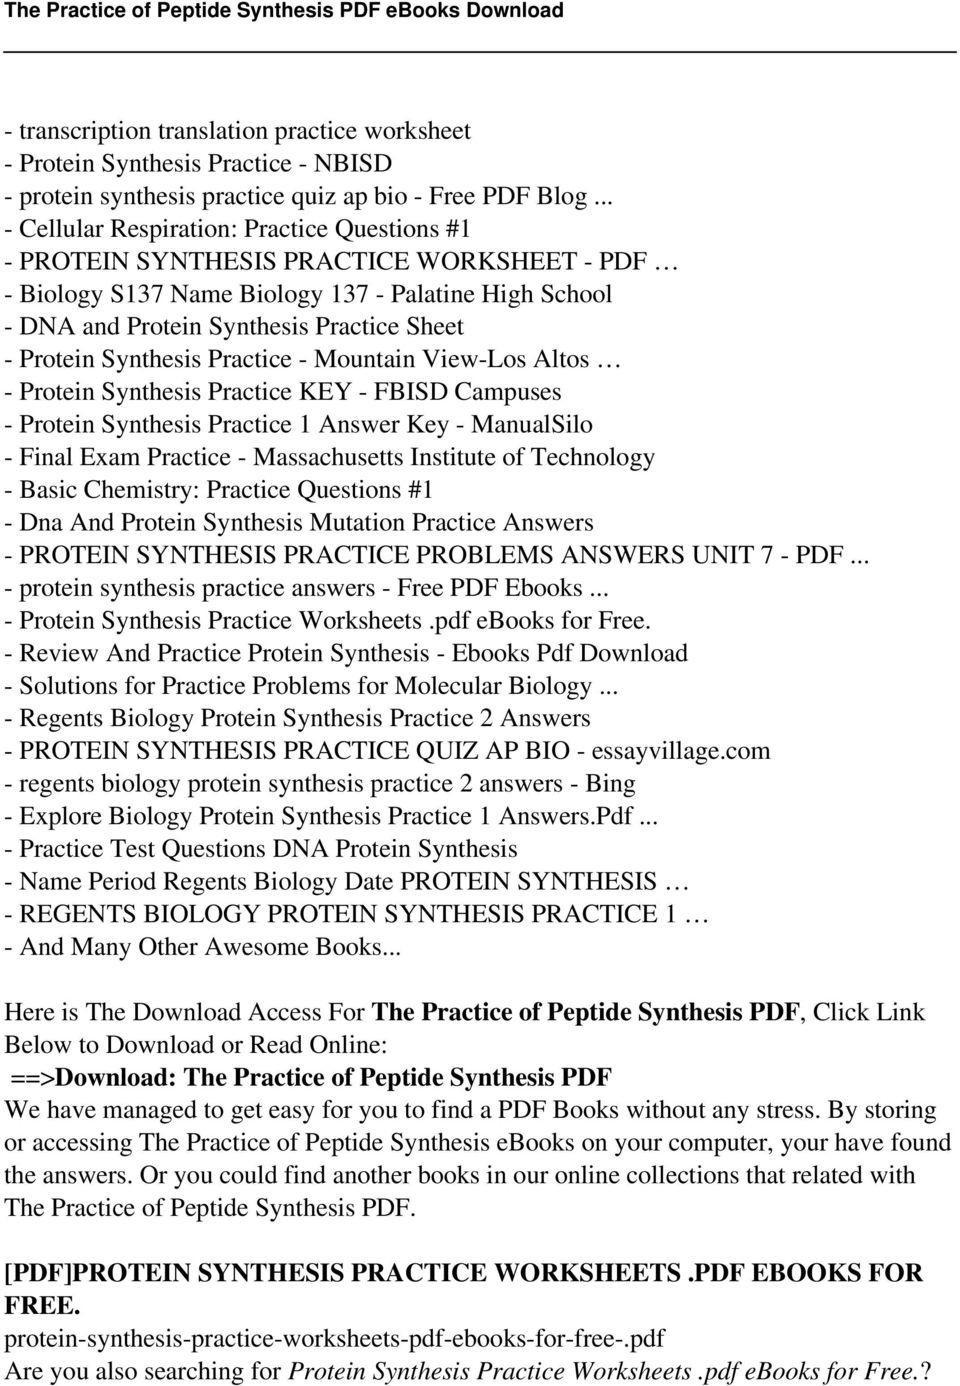 The Practice of Peptide Synthesis - PDF Free Download Intended For Dna Mutation Practice Worksheet Answers